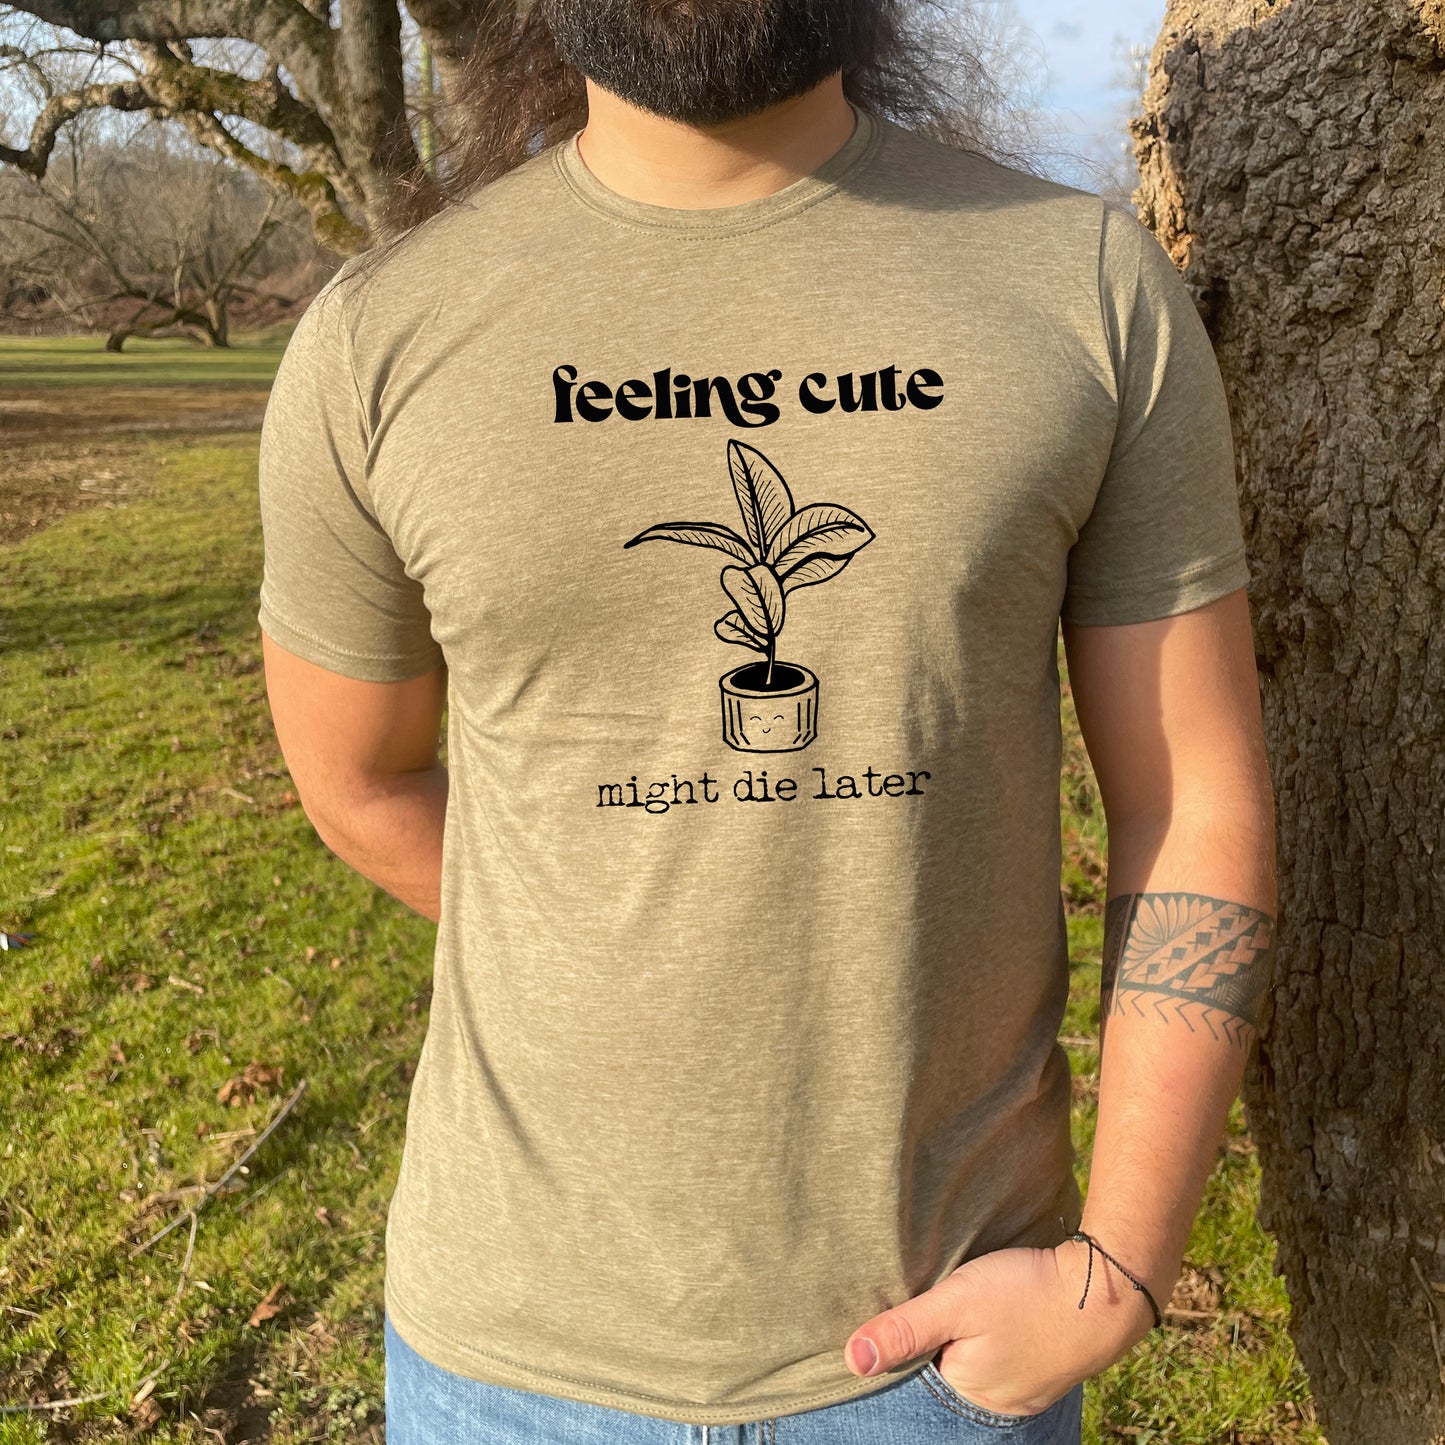 a man with a beard wearing a t - shirt that says feeling cute might be